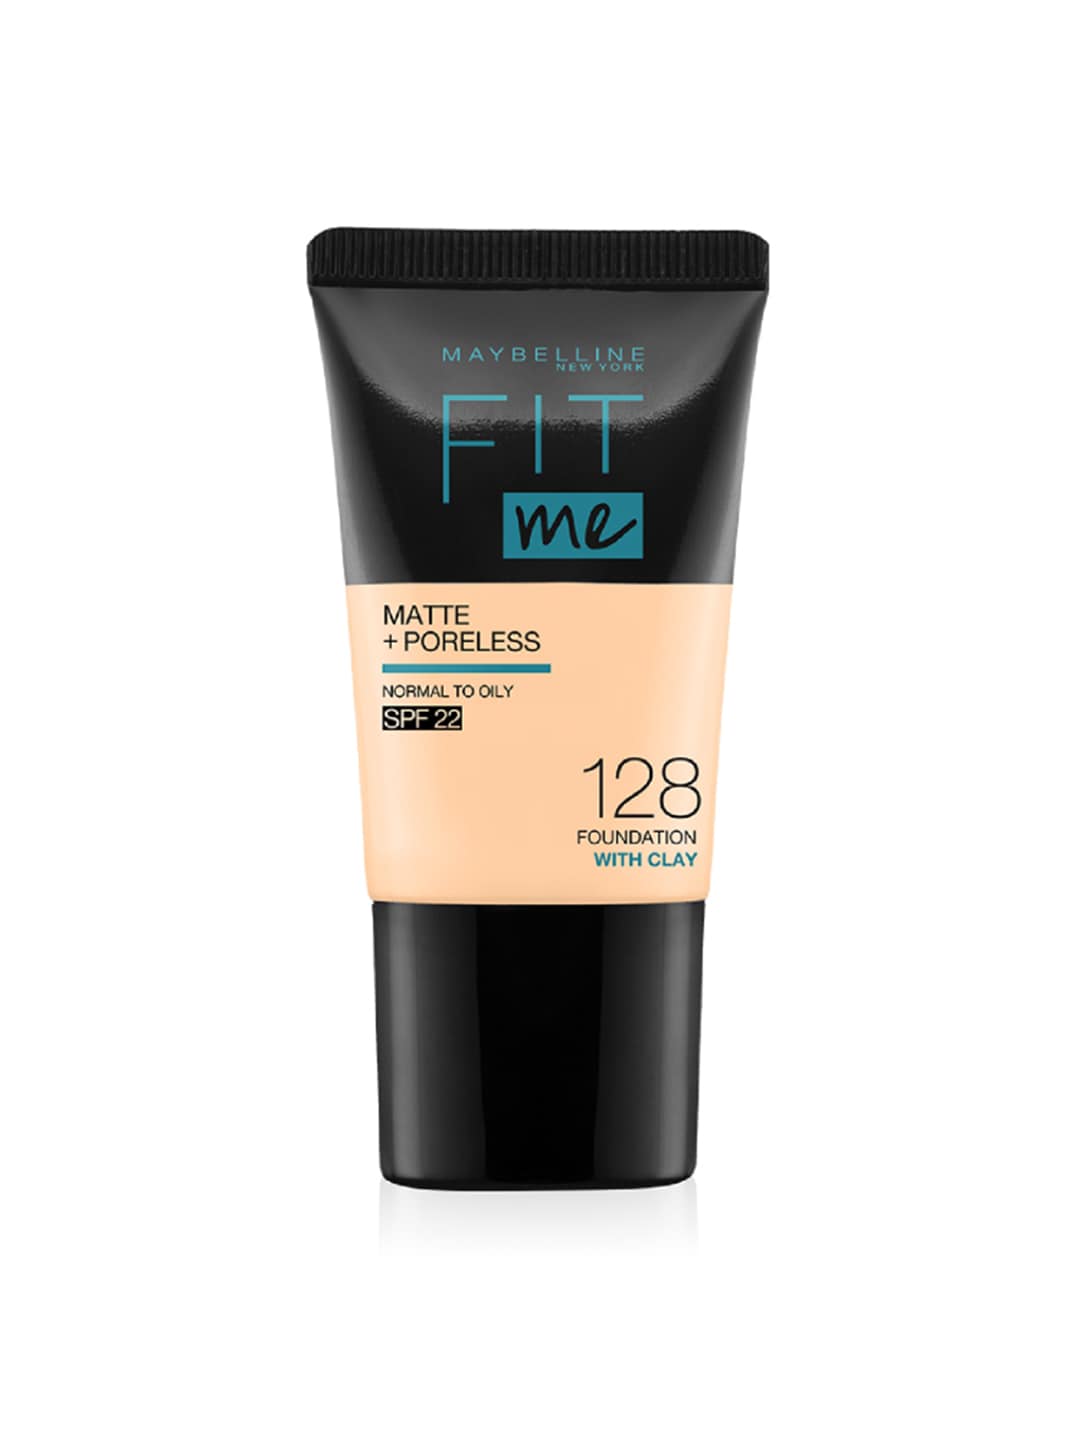 Maybelline New York Fit Me Matte+Poreless Liquid Foundation 18 ml - Warm Nude 128 Price in India